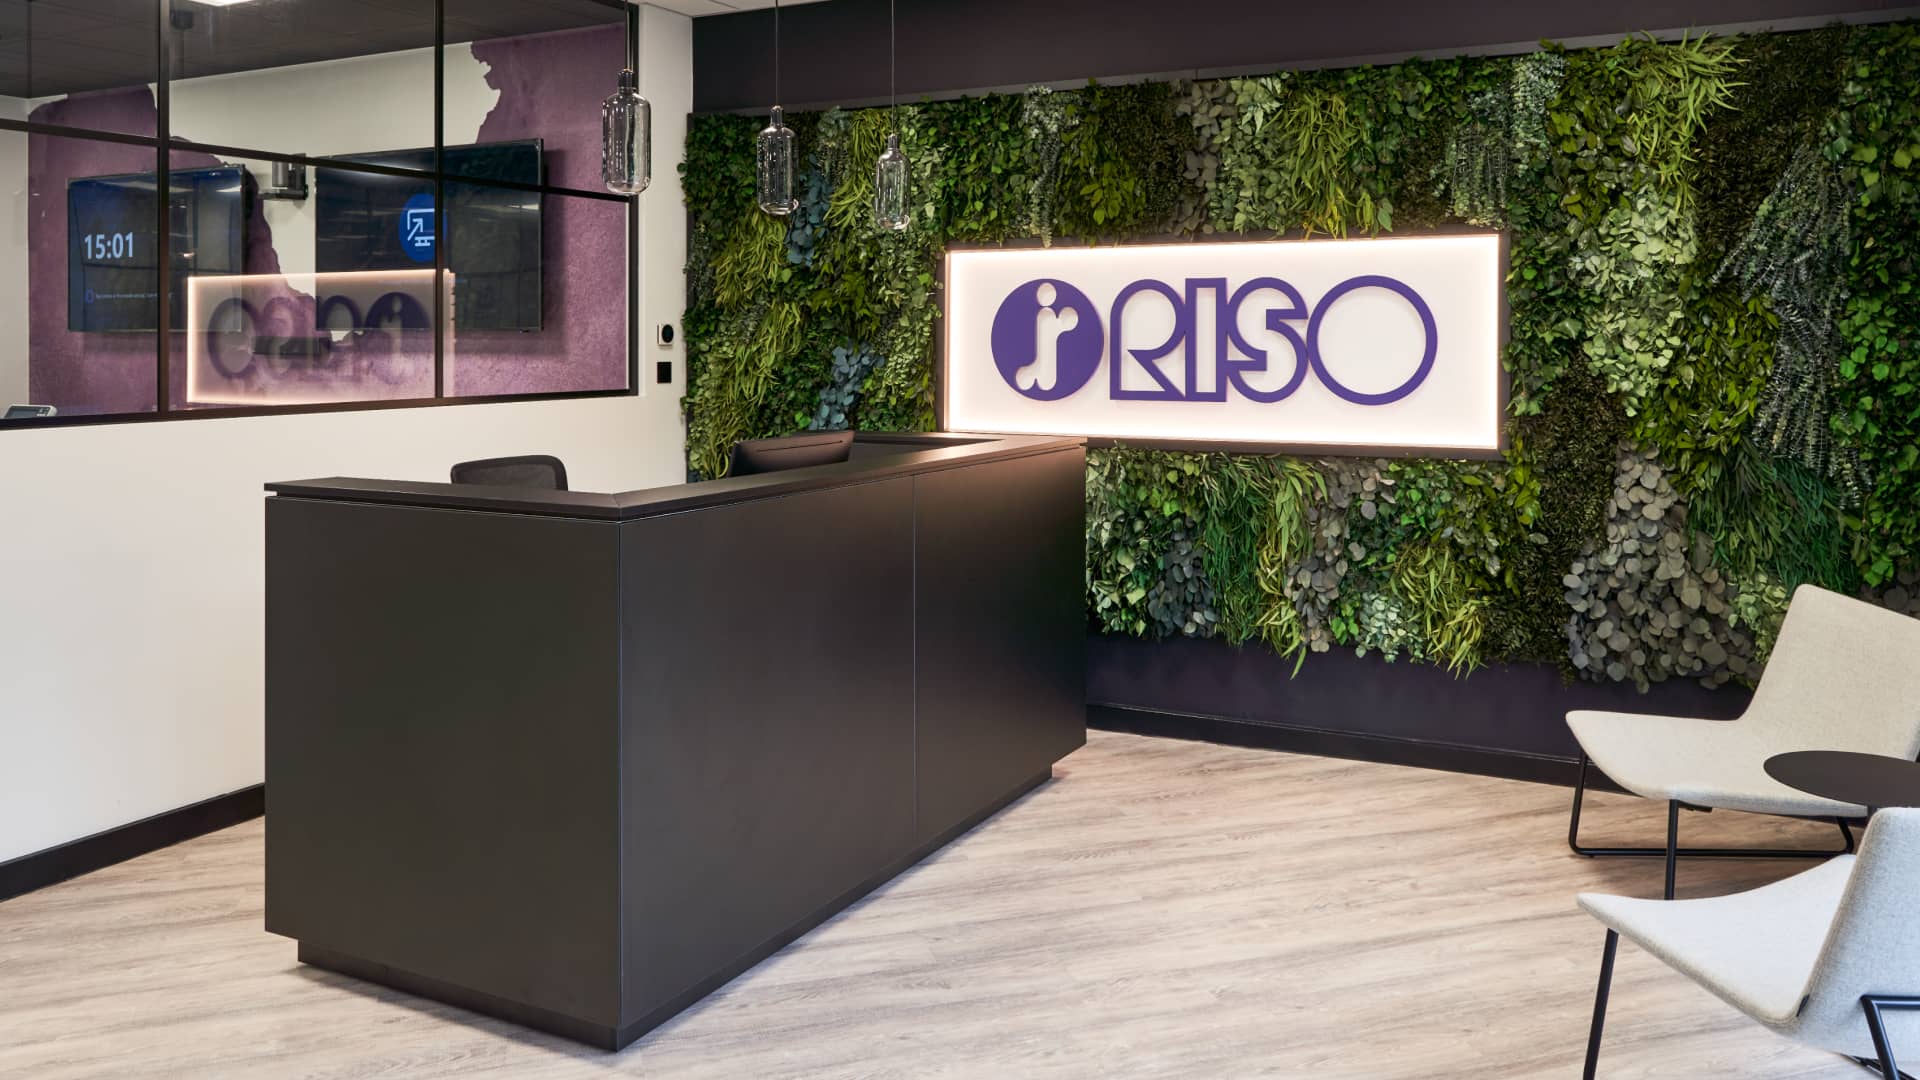 Case Study - Cleo's inspirational office interior design for Riso, office d&b in London